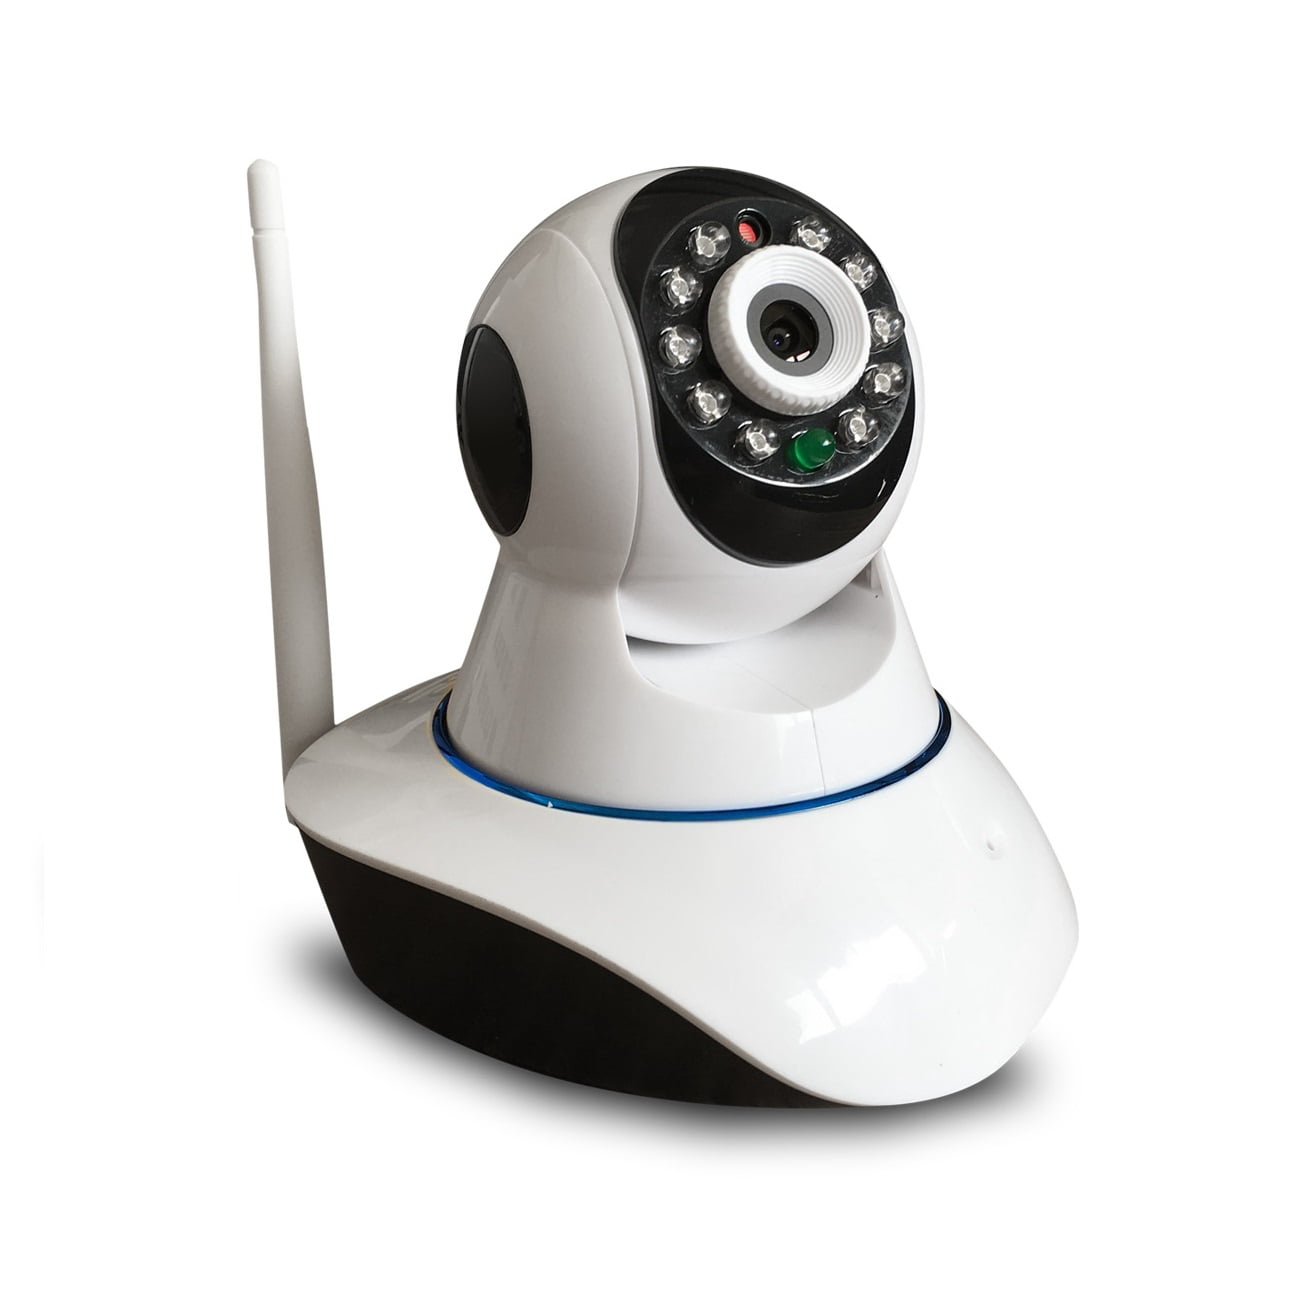 Sungale SGIPC86 Wireless Home Security Camera with Night Vision White